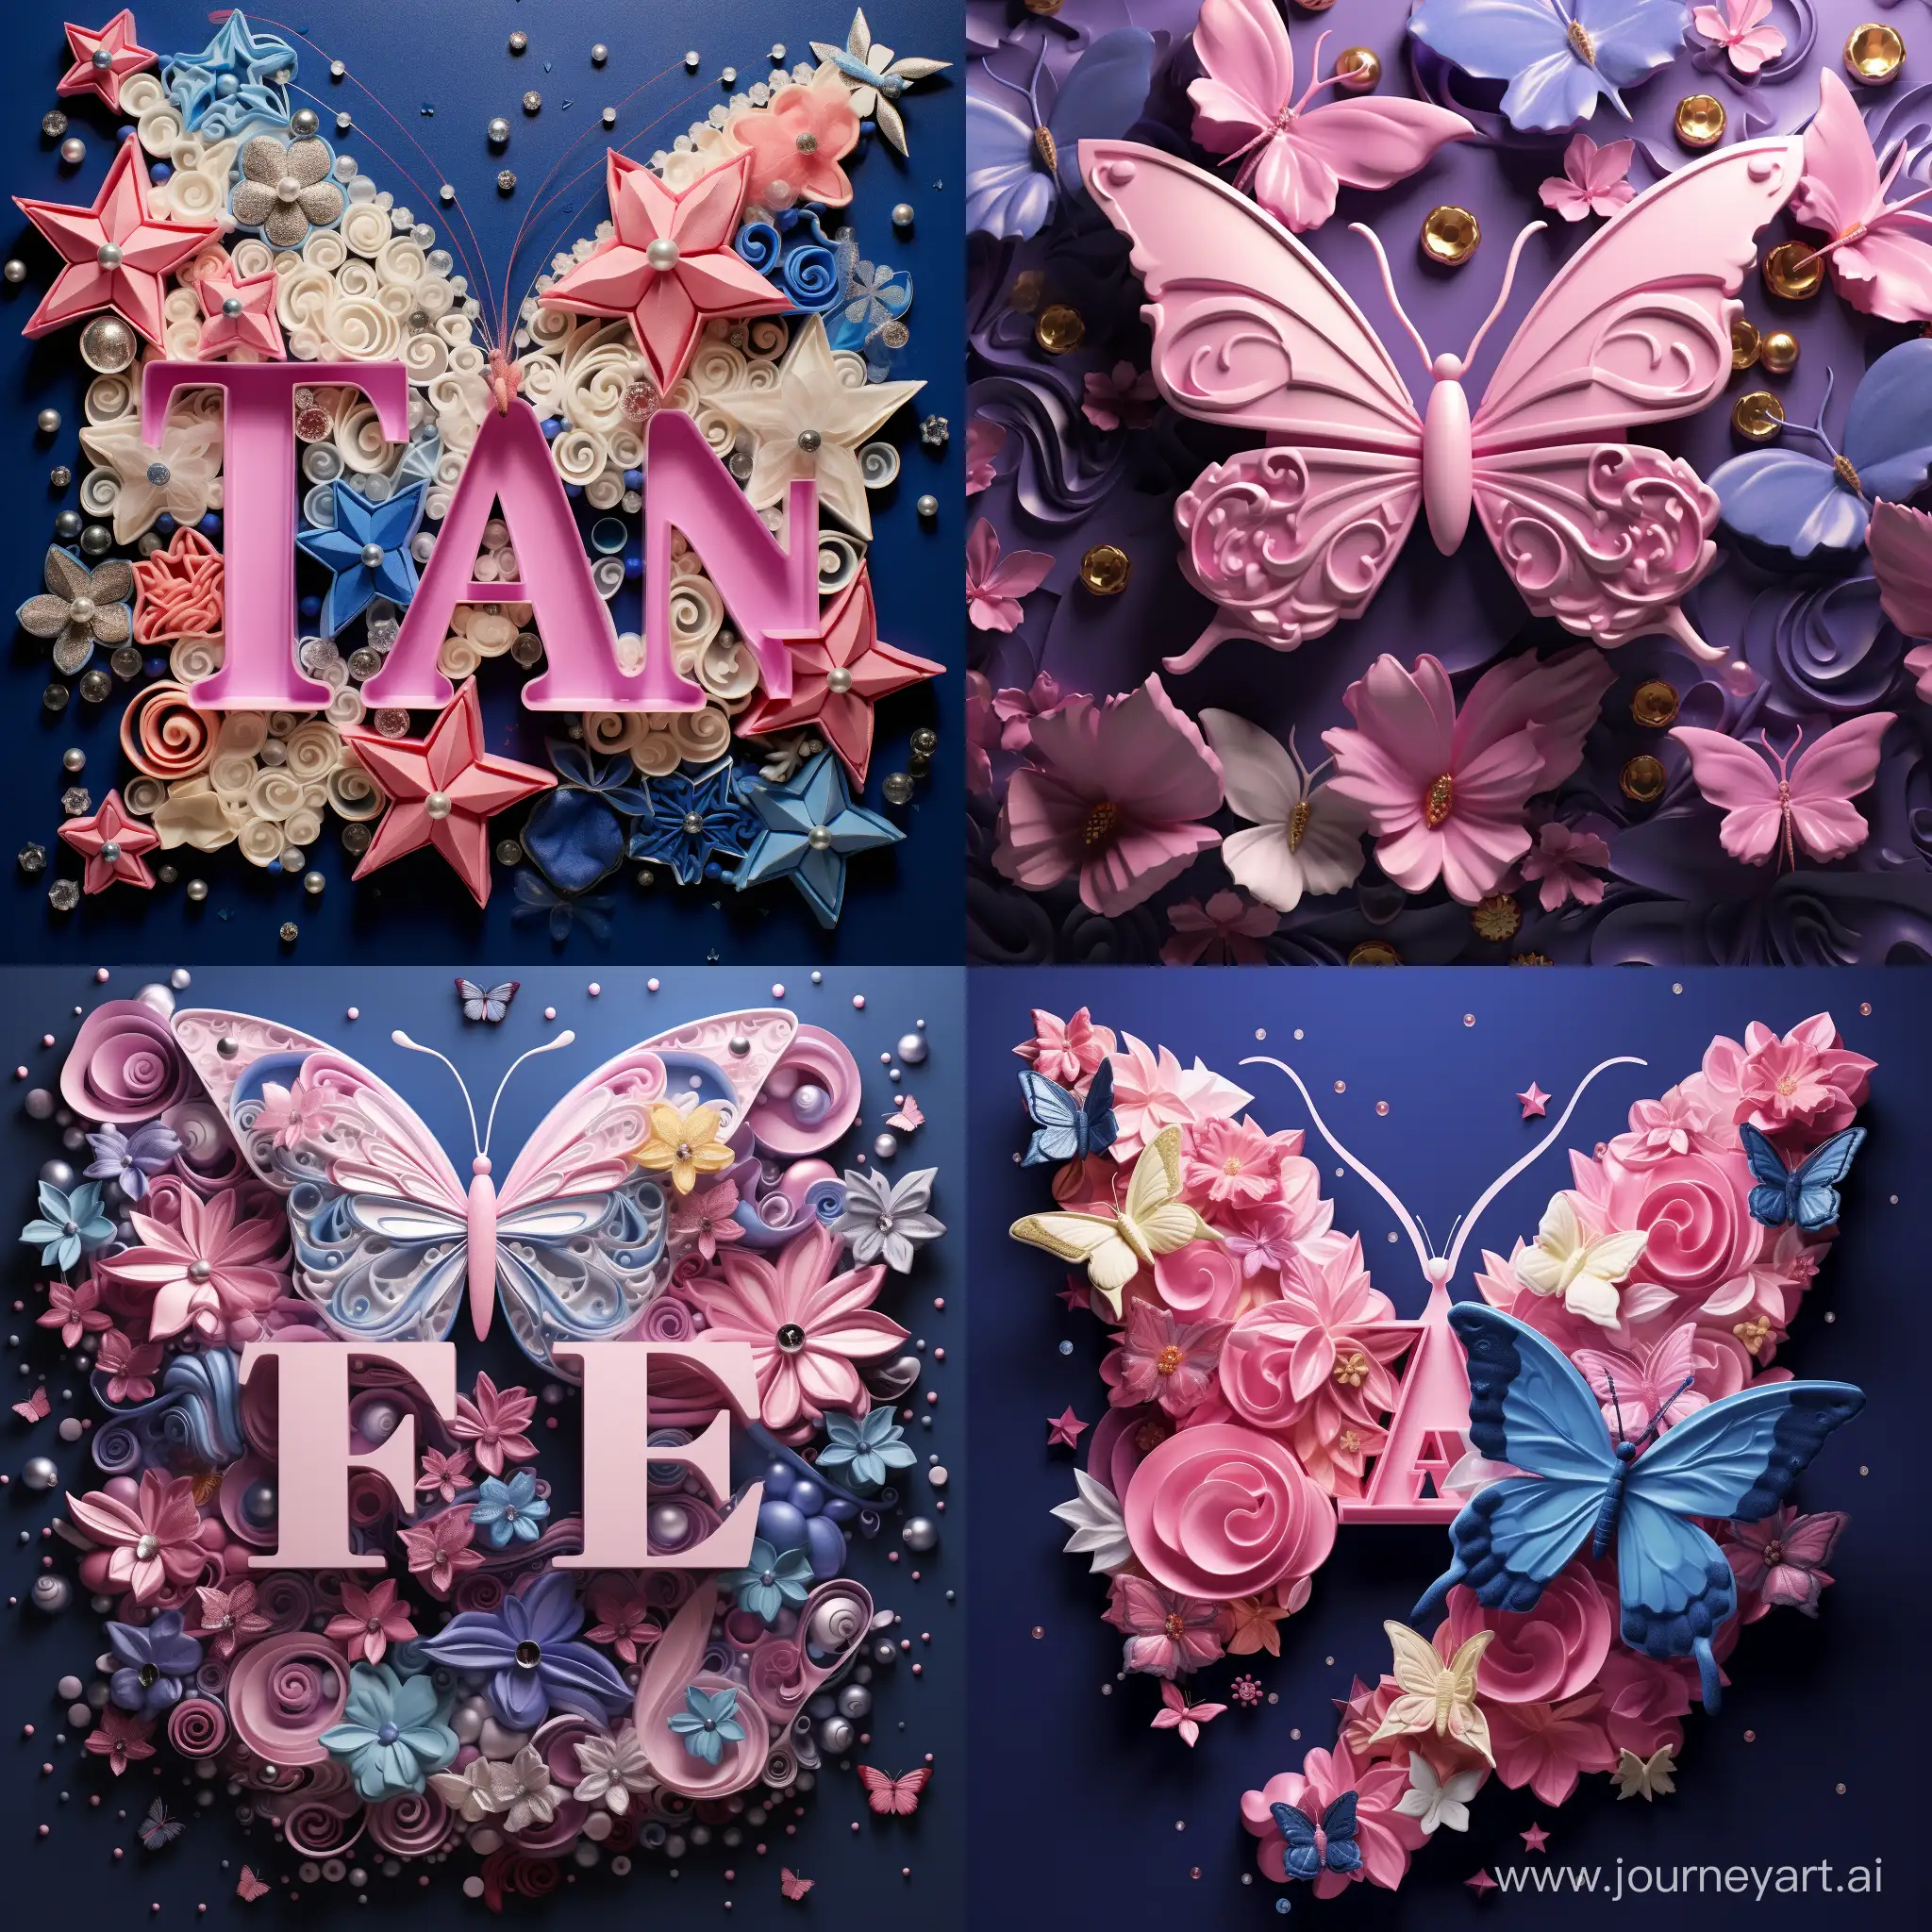 Enchanting-3D-Animation-Faten-Name-on-Pink-Blue-and-Fuchsia-Stones-with-Butterflies-Pearls-and-Stars